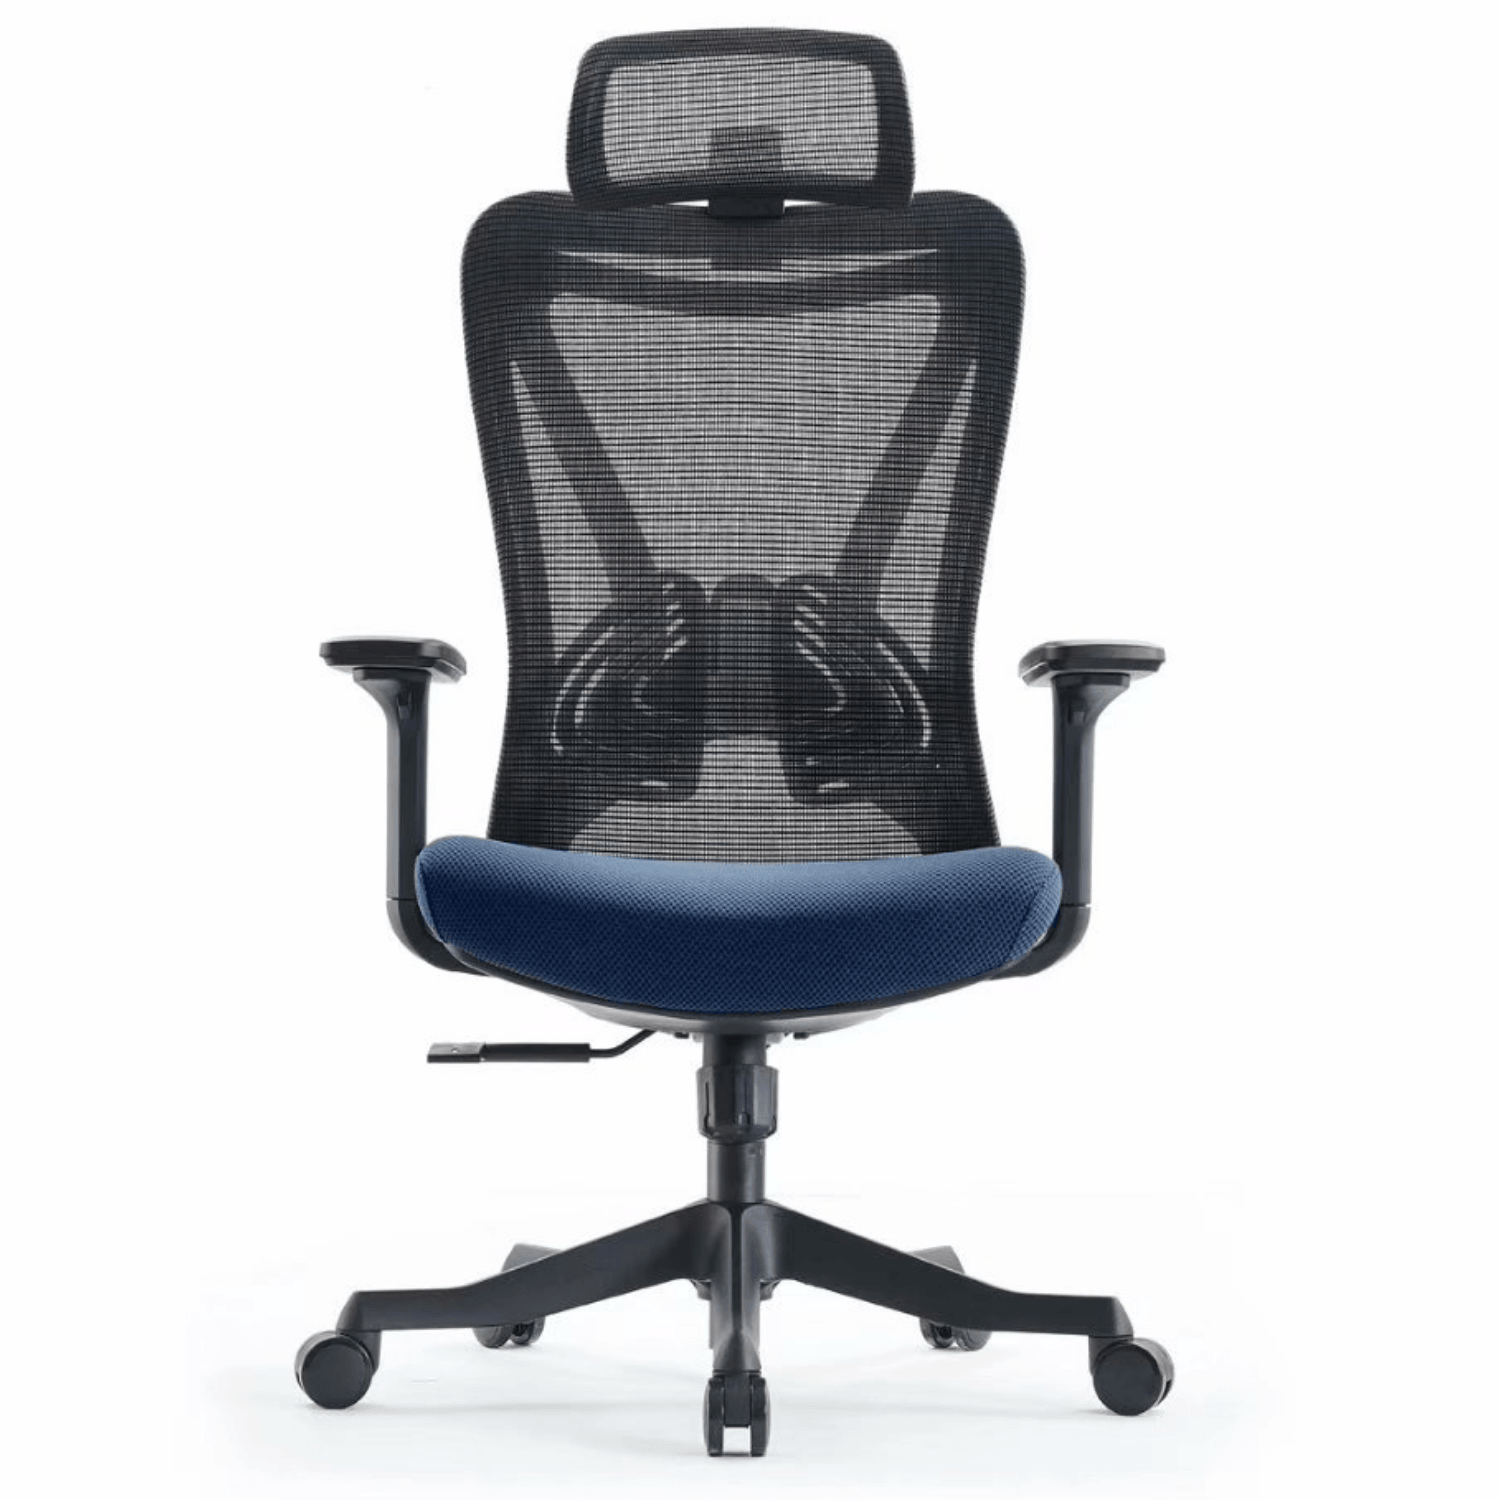 DrLuxur Helios Pro ™ Office/Gaming Chair- Perfect Solution For Back and Posture - DrLuxur